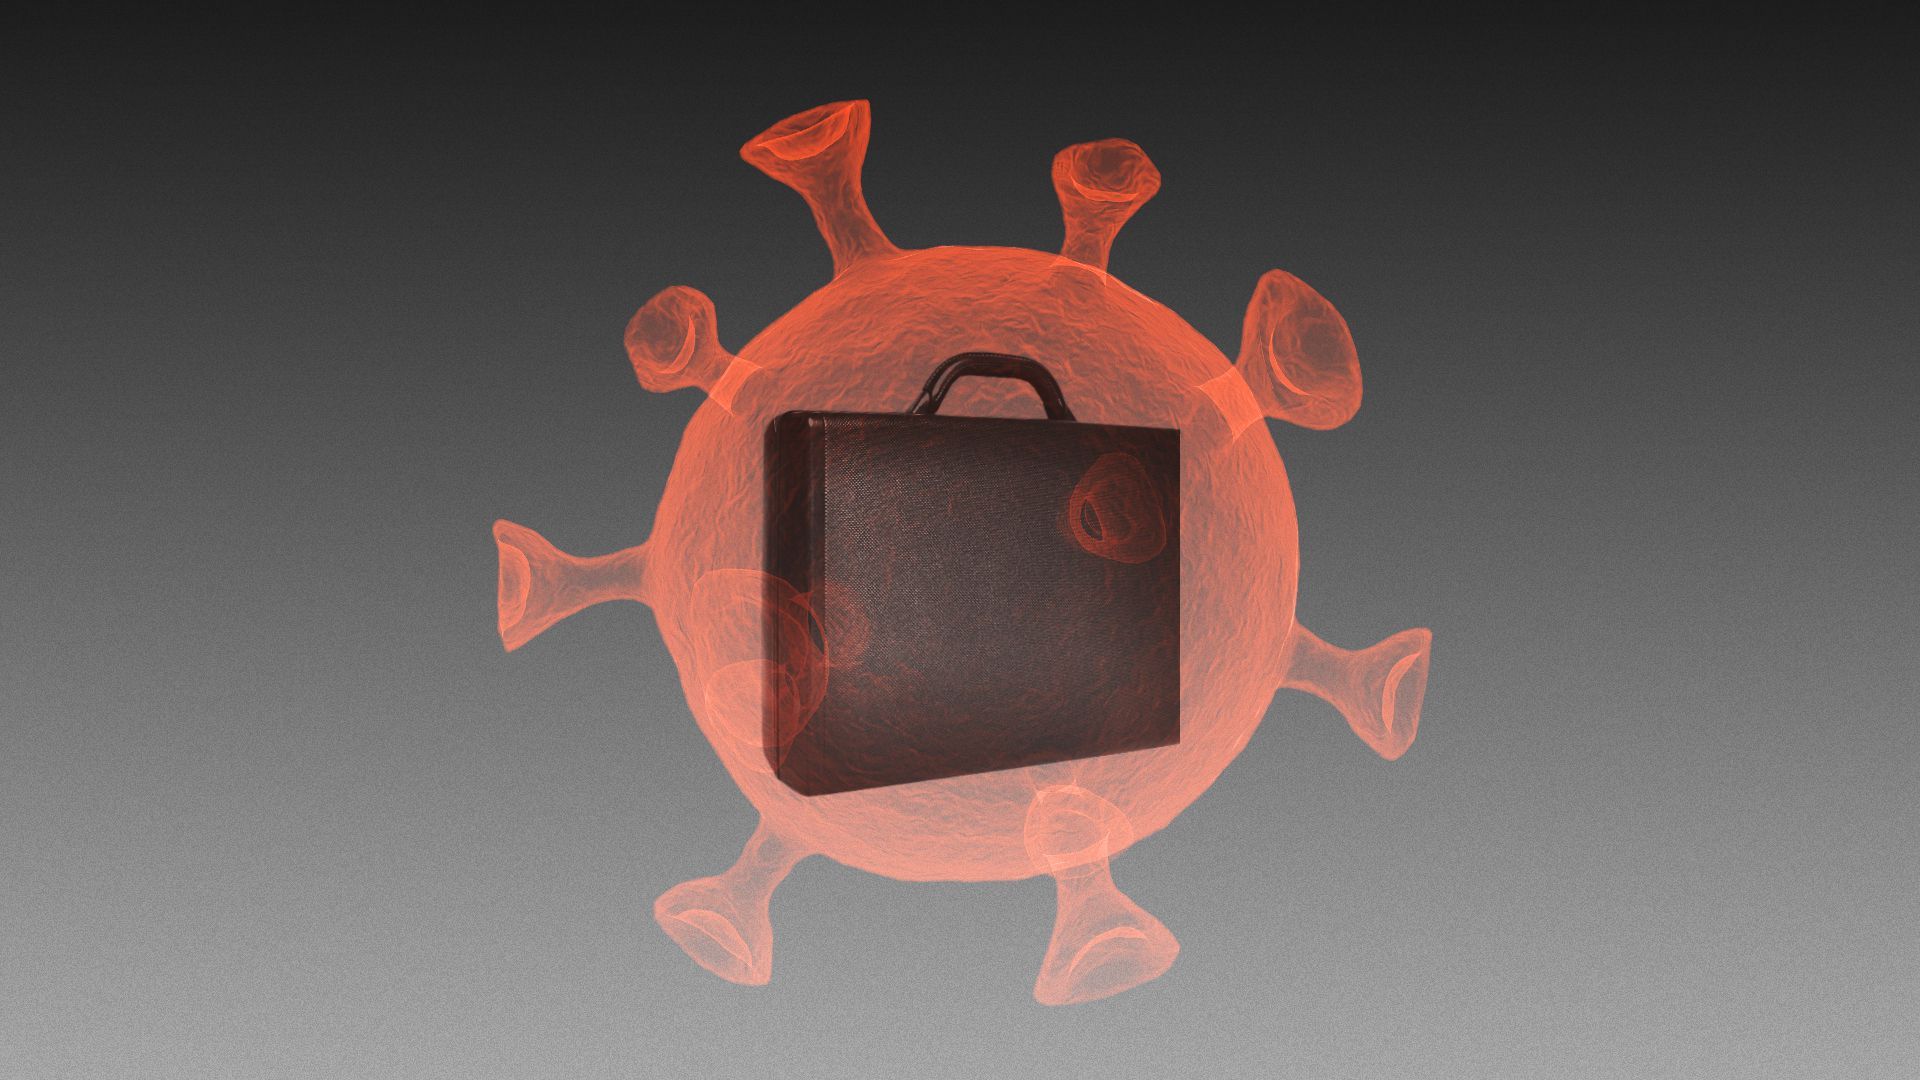 Illustration of a briefcase housed inside a transparent COVID cell shape